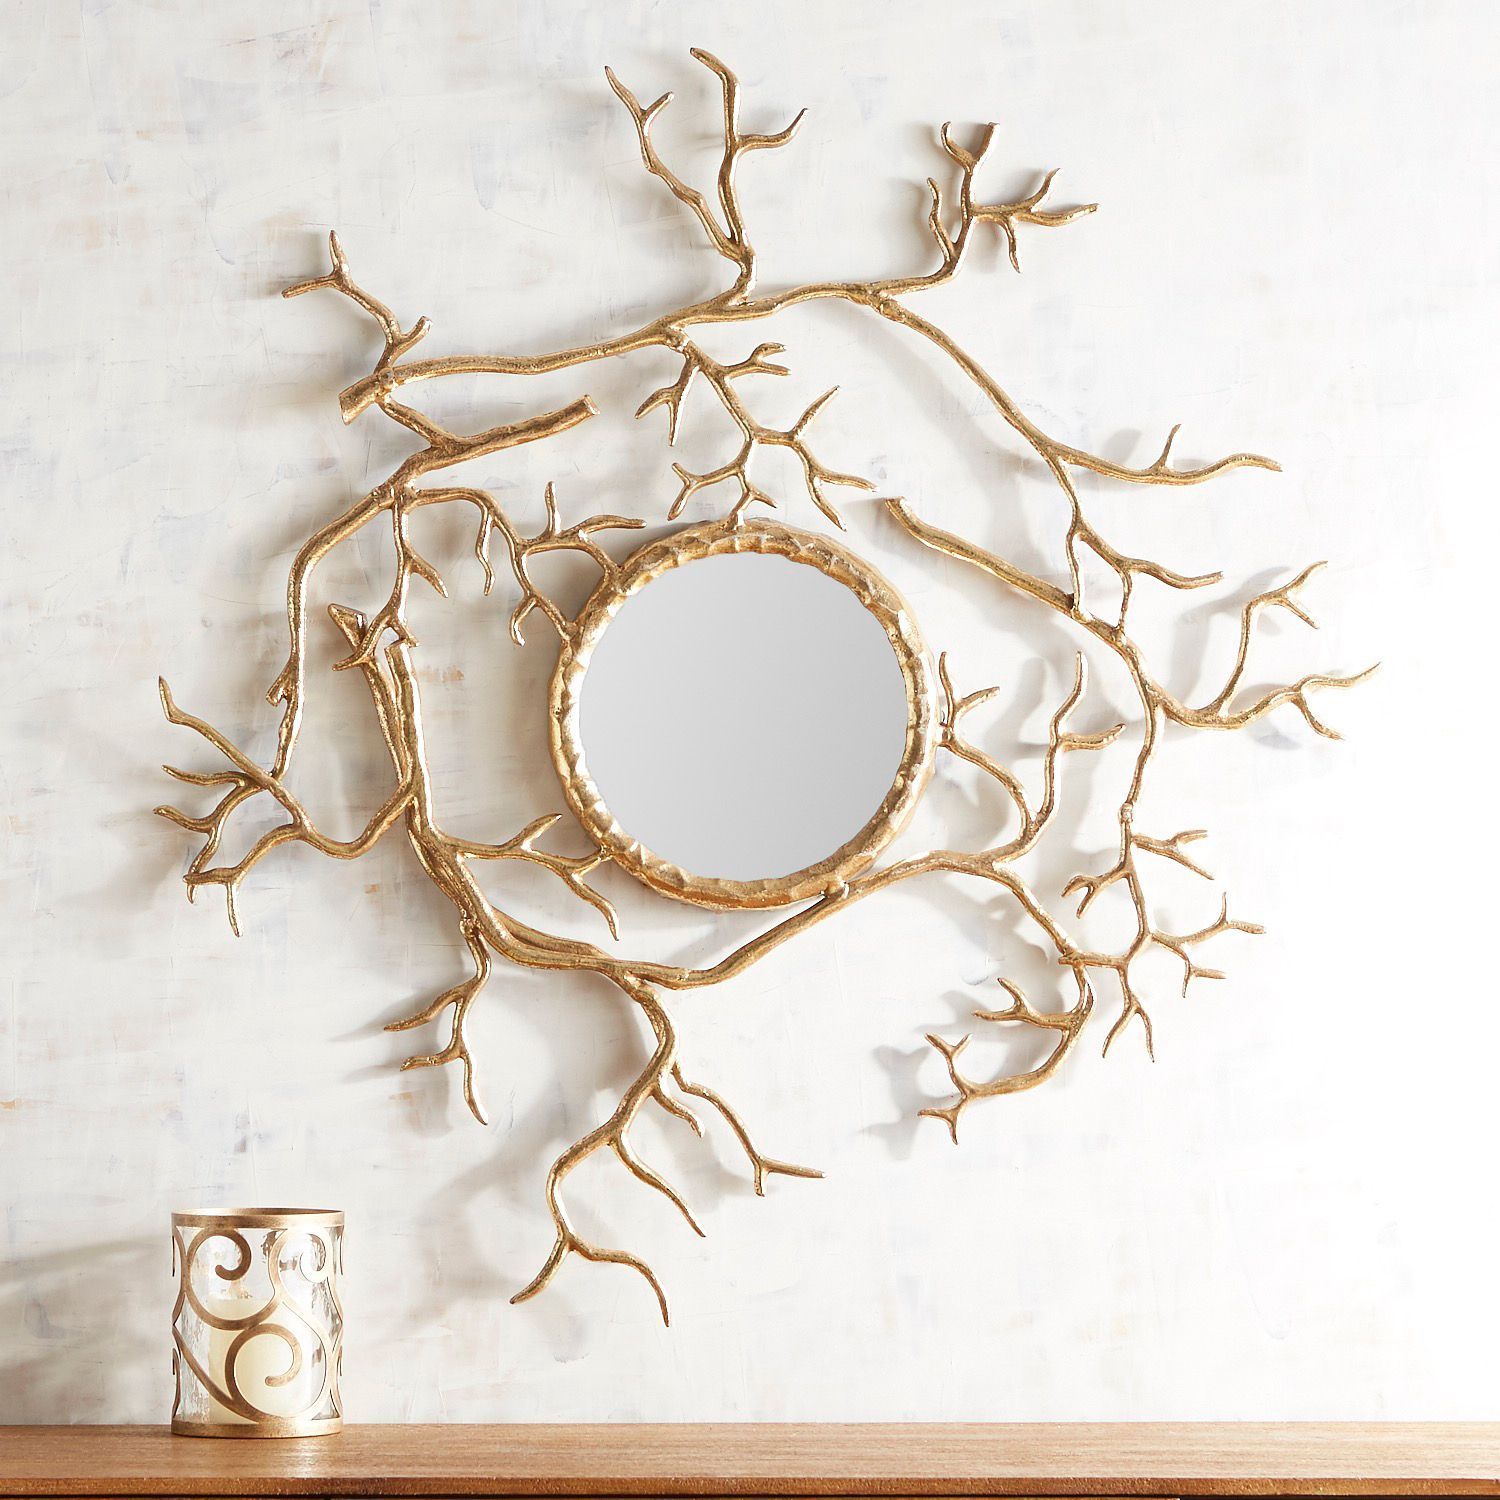 Golden Branches Mirror | Pier 1 Imports | Mirror Crafts, Decor, Branch Throughout Twisted Sunburst Metal Wall Art (View 14 of 15)